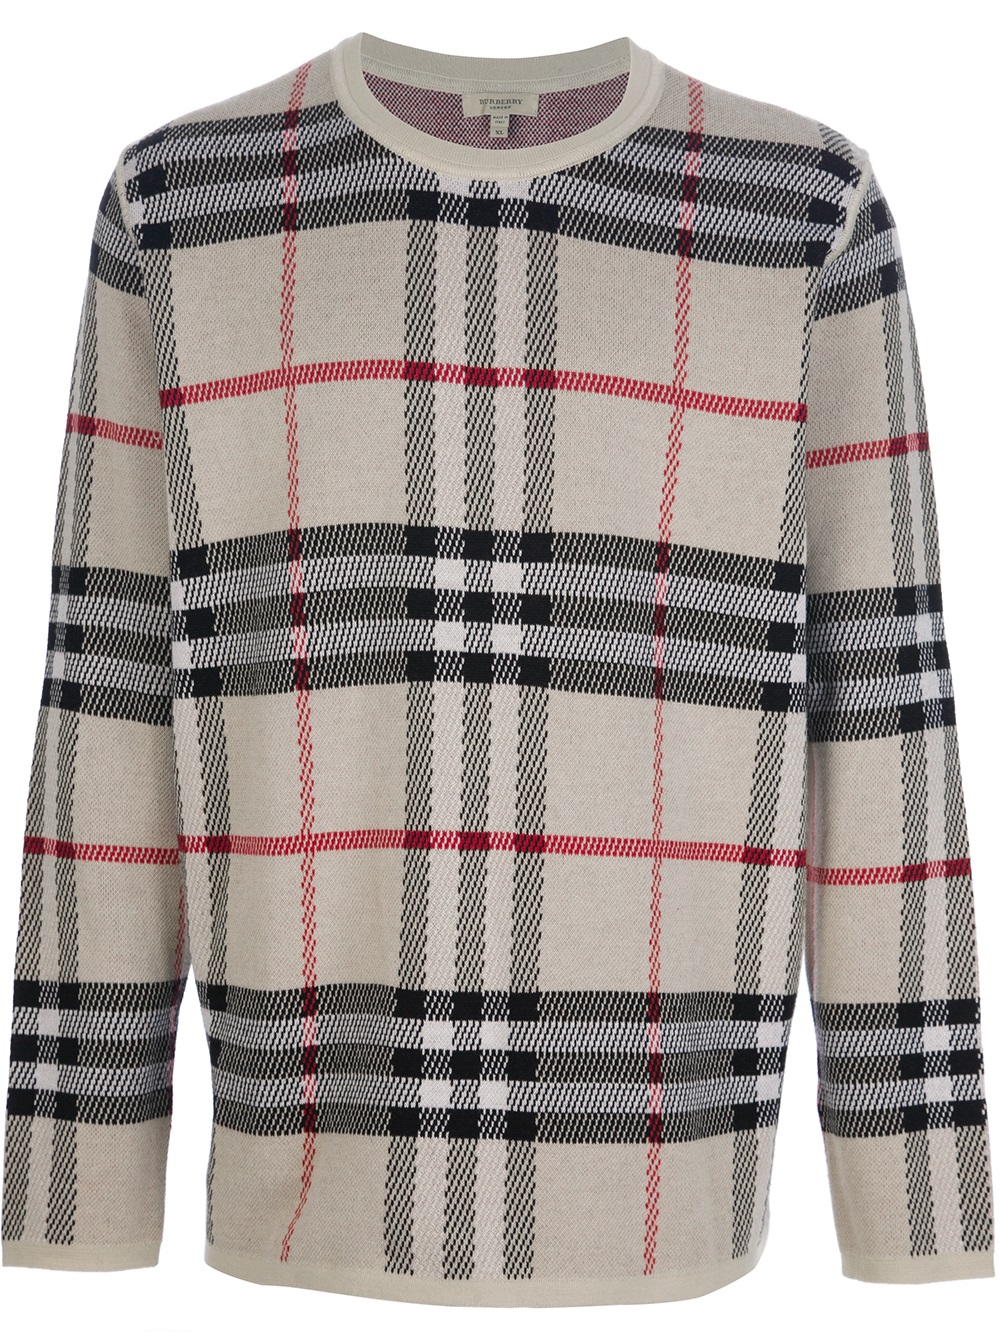 Burberry Checked Print Sweater in Beige (Natural) for Men - Lyst